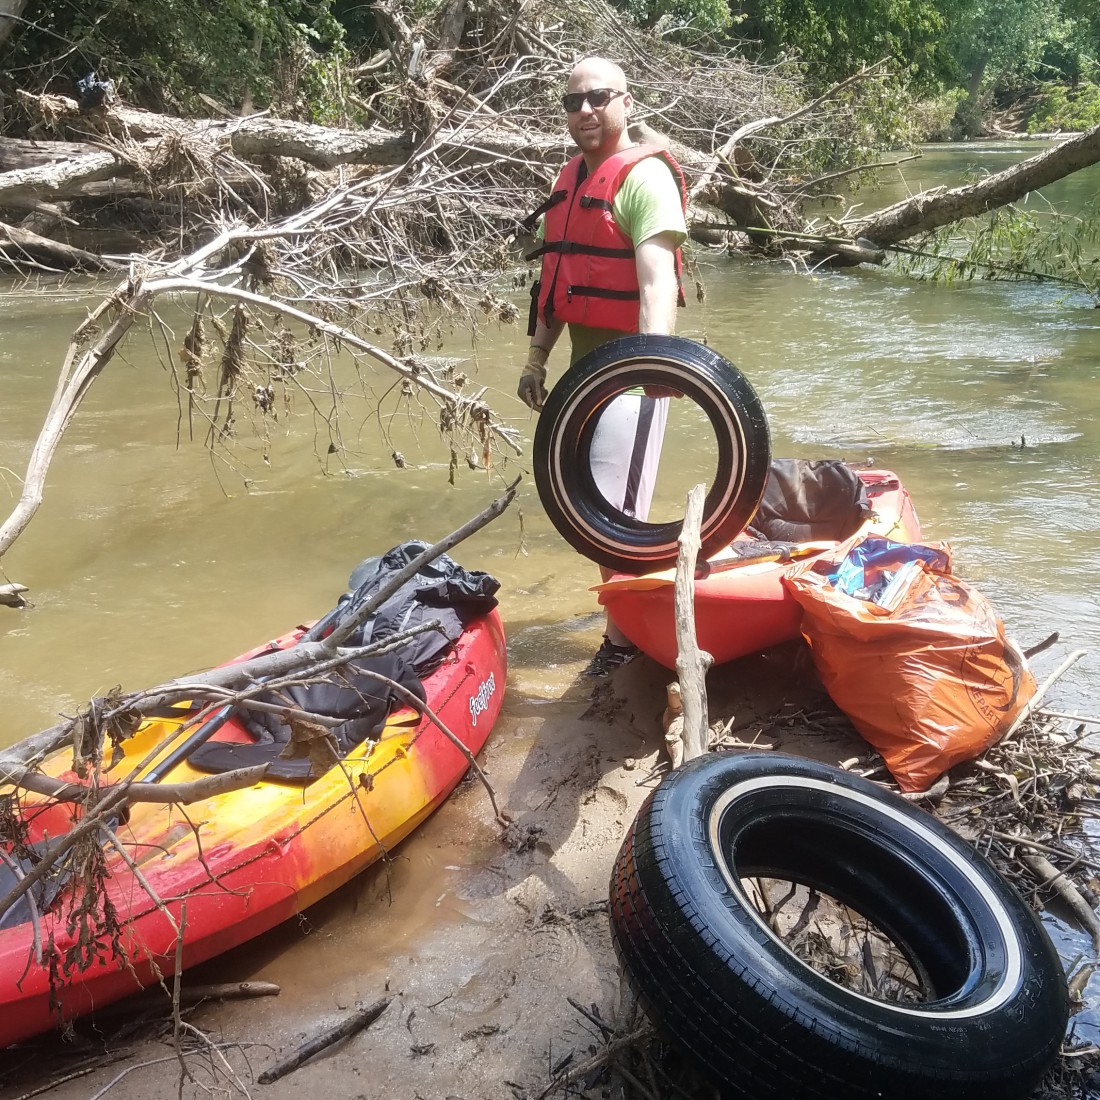 Lincoln Hamer with trash during Swannanoa River cleanup